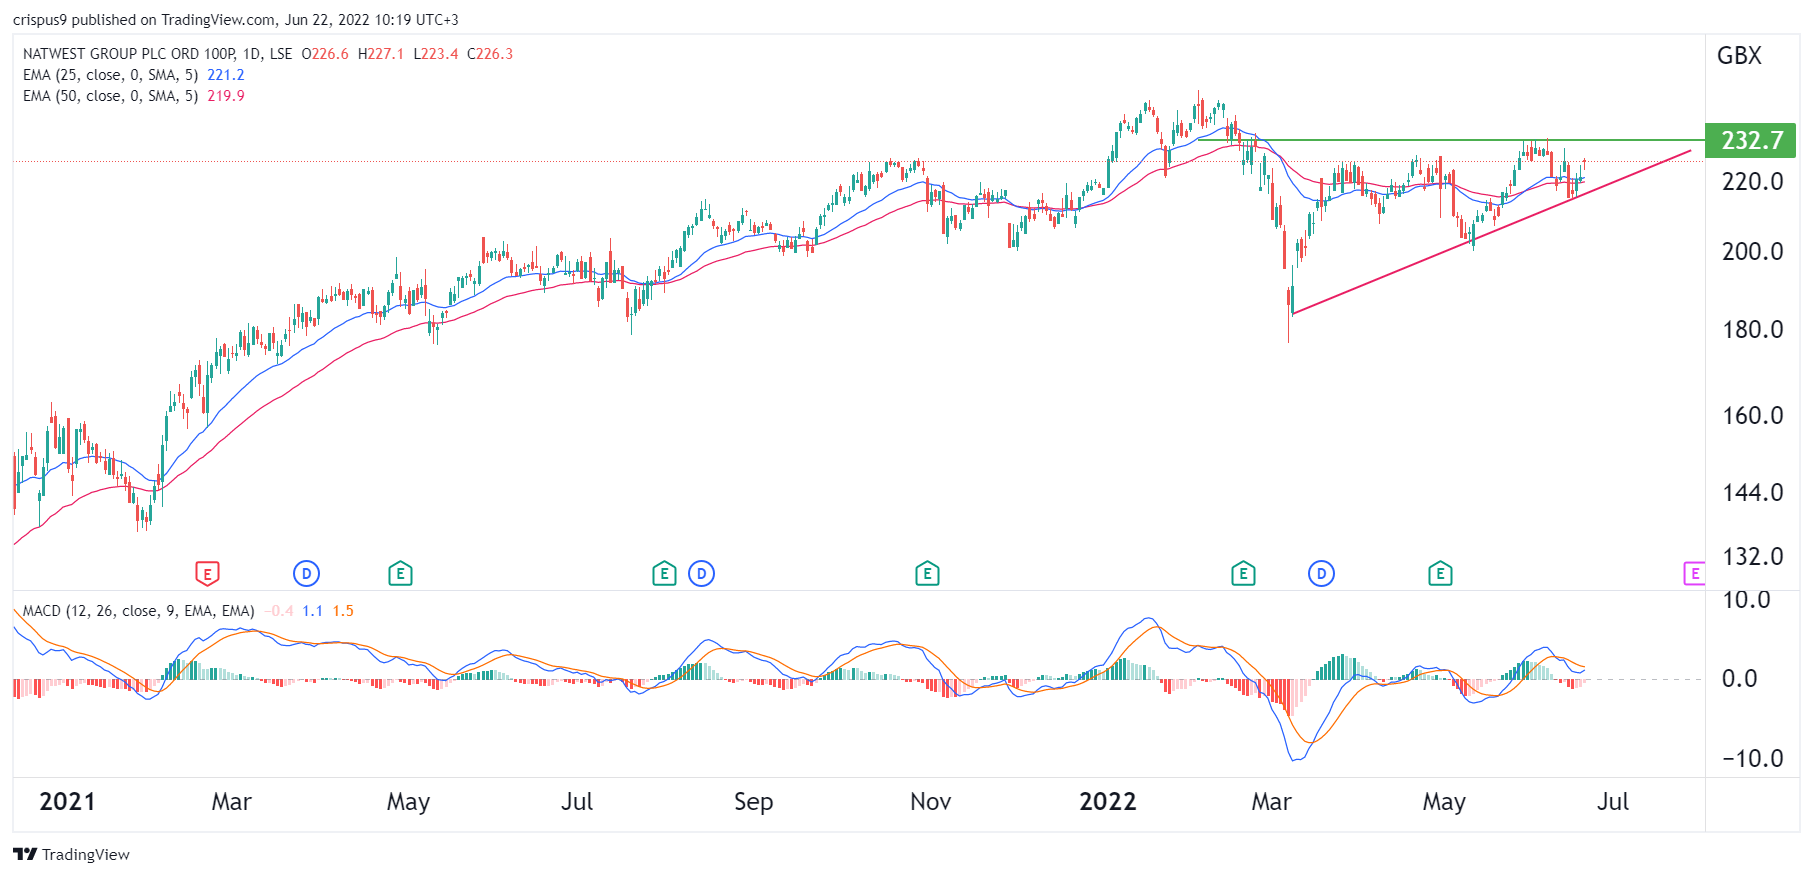 NatWest Share Price Forms Ascending Triangle Pattern. What Next?